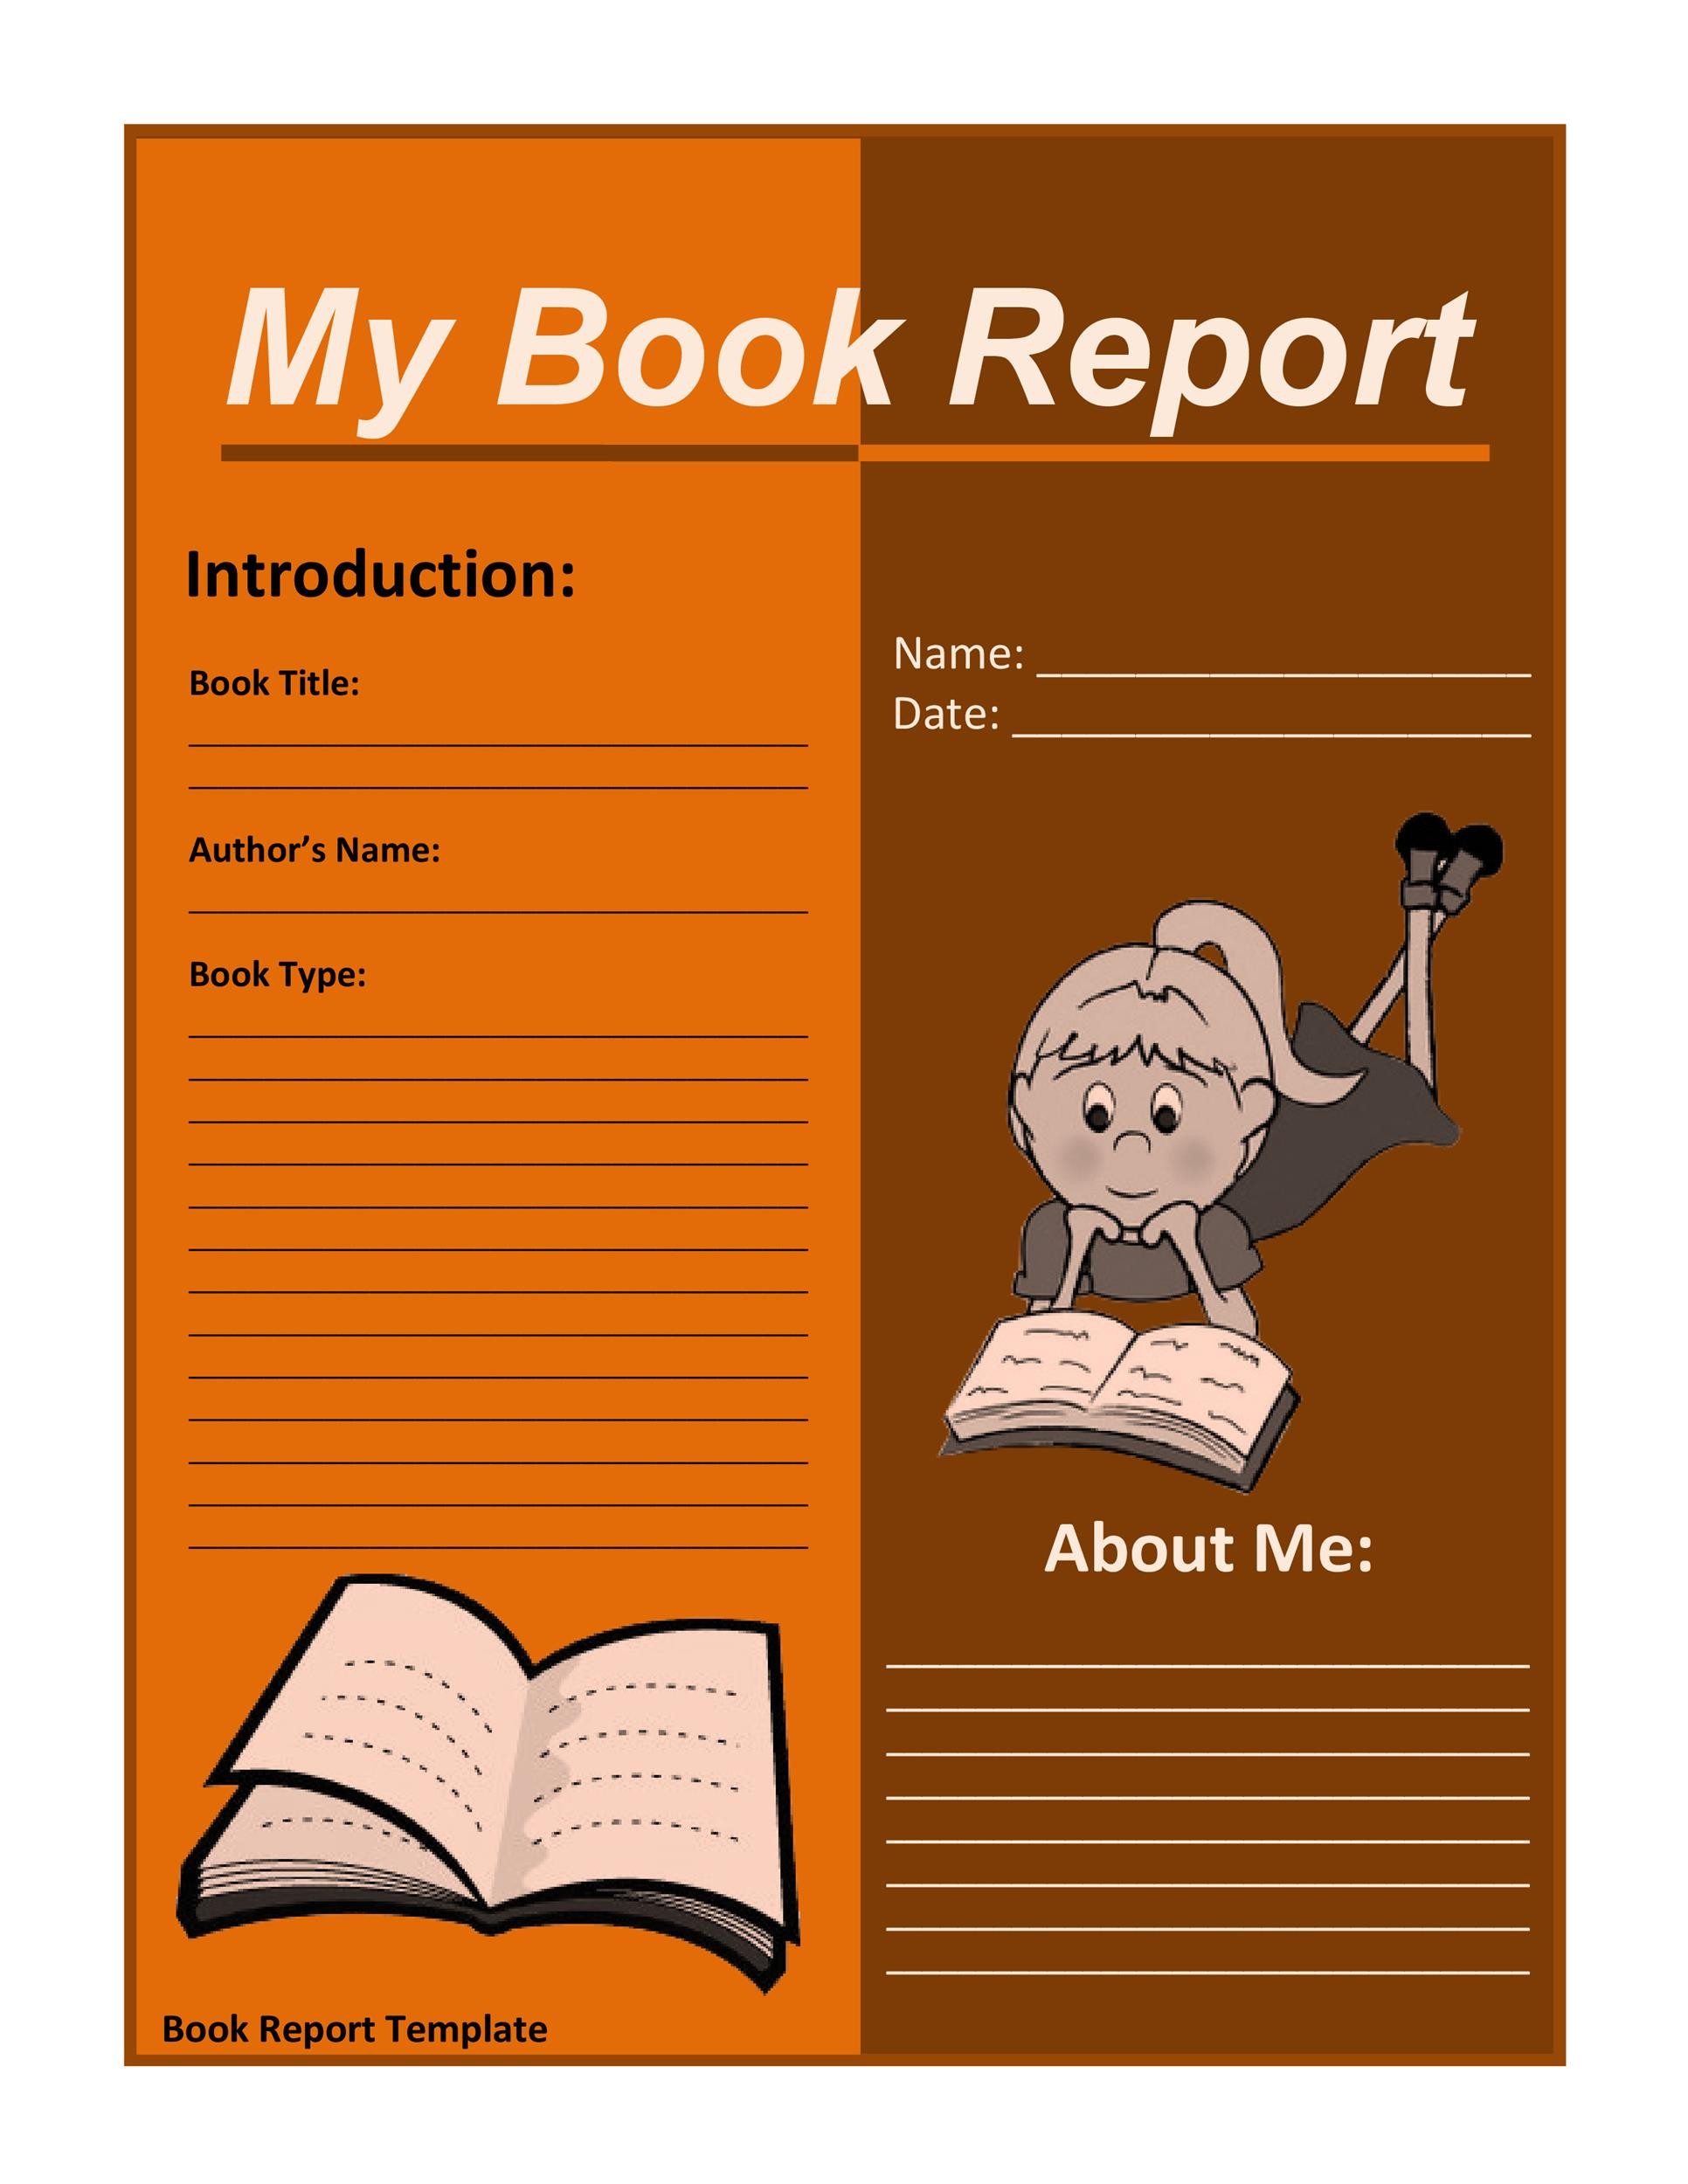 What should be in the introduction of a book report